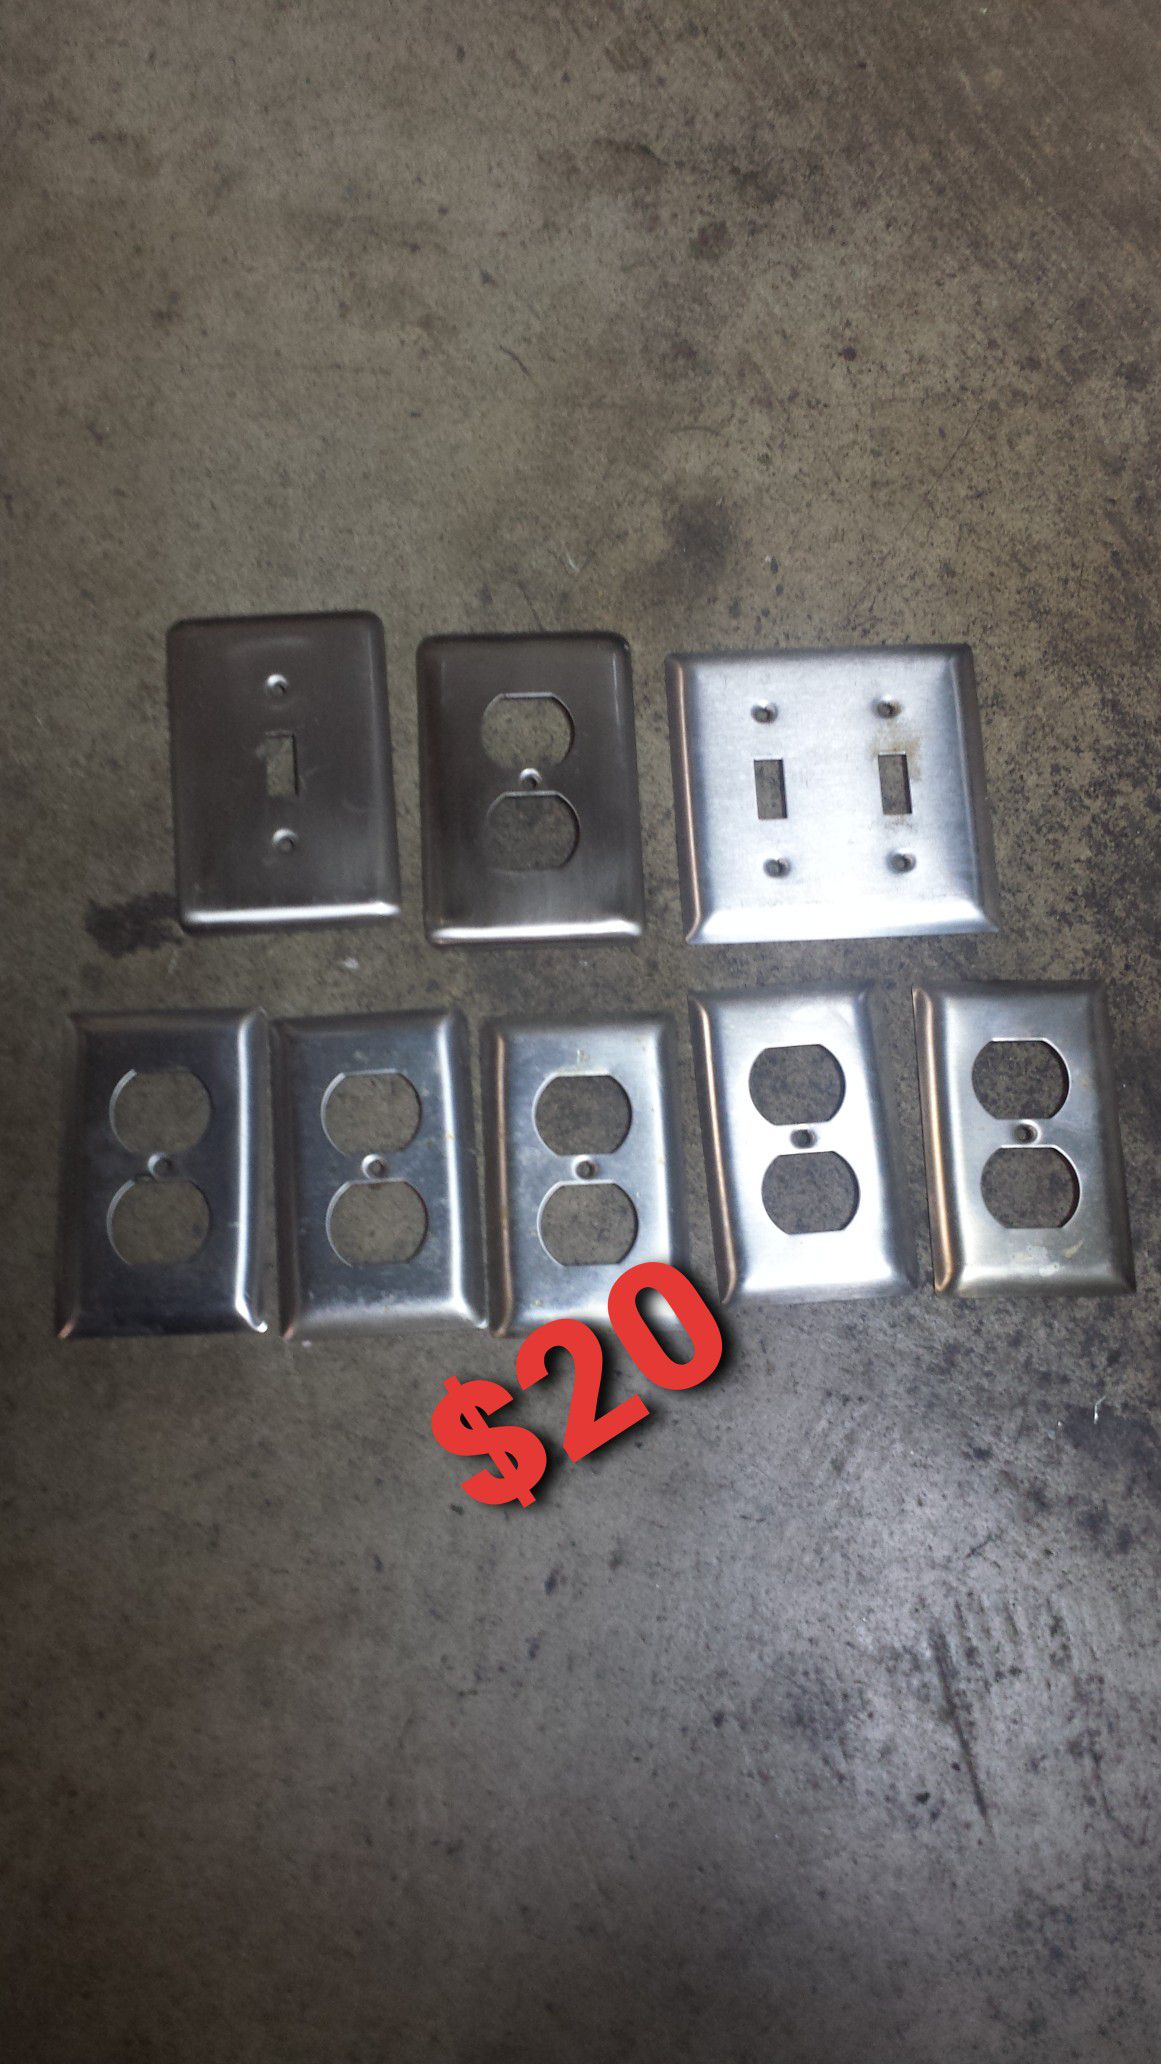 Stainless steel outlet covers